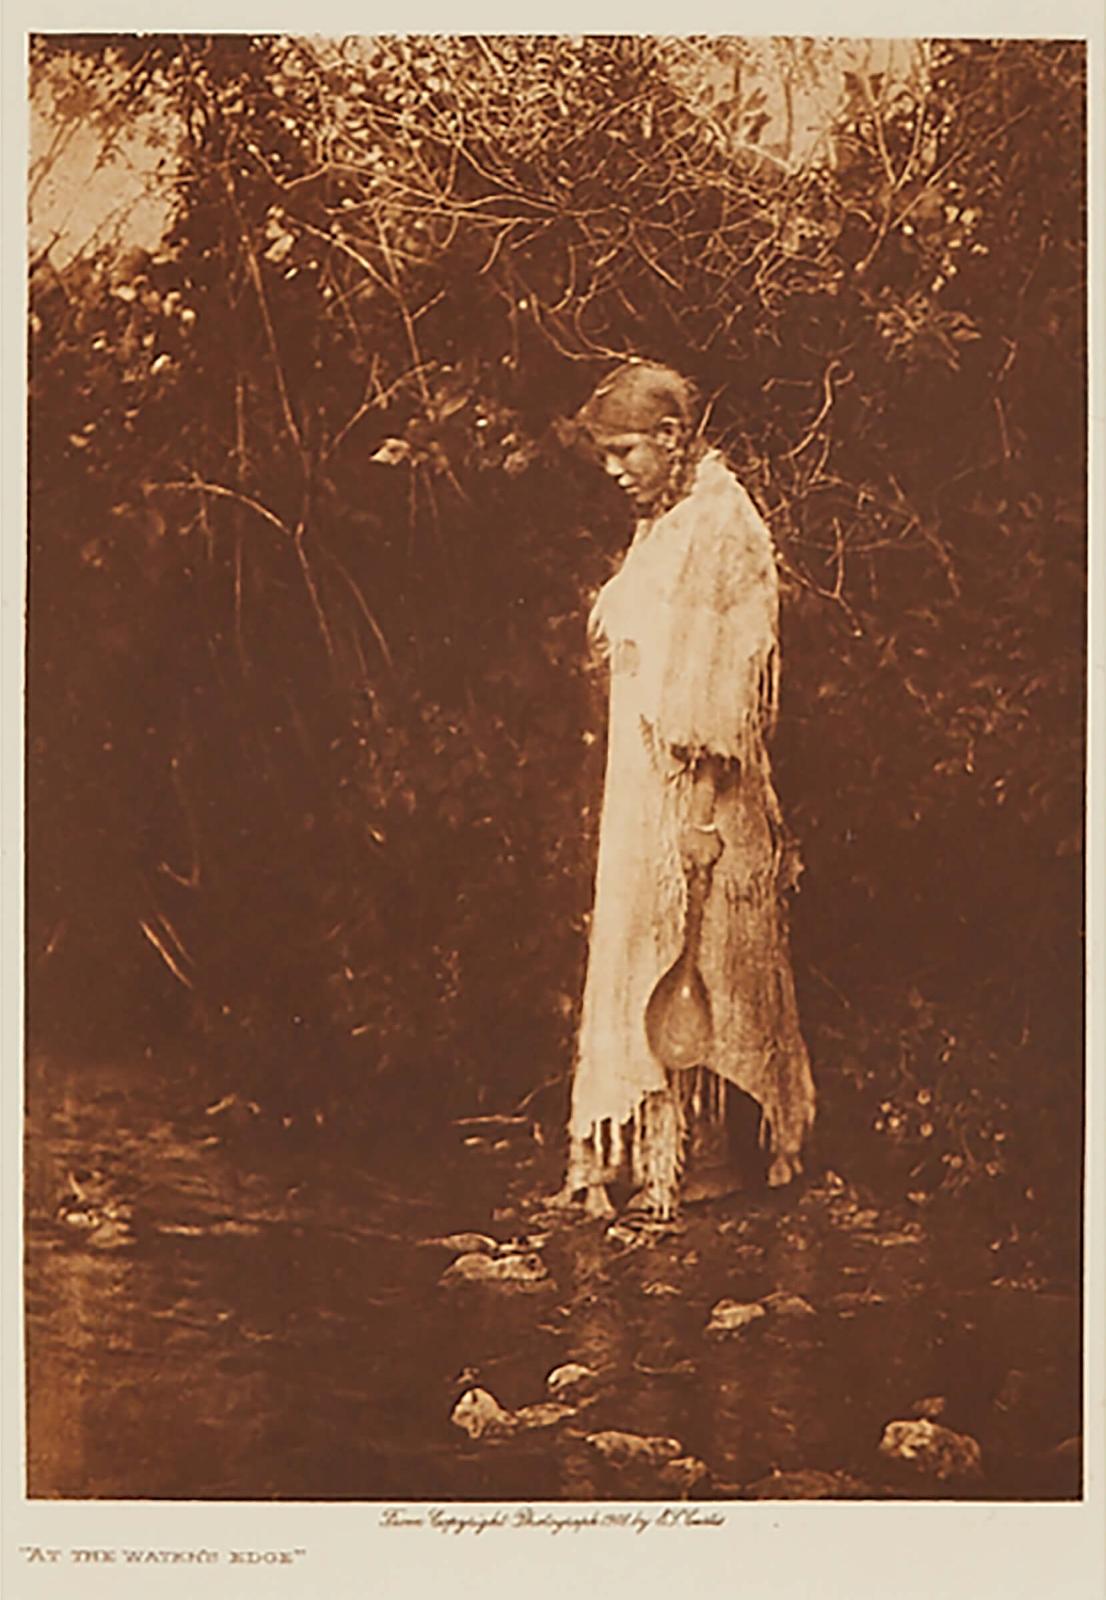 Edward Sherrif Curtis (1868-1952) - At The Water's Edge; Slow Bull's Wife; Kills In Timber - Ogalala